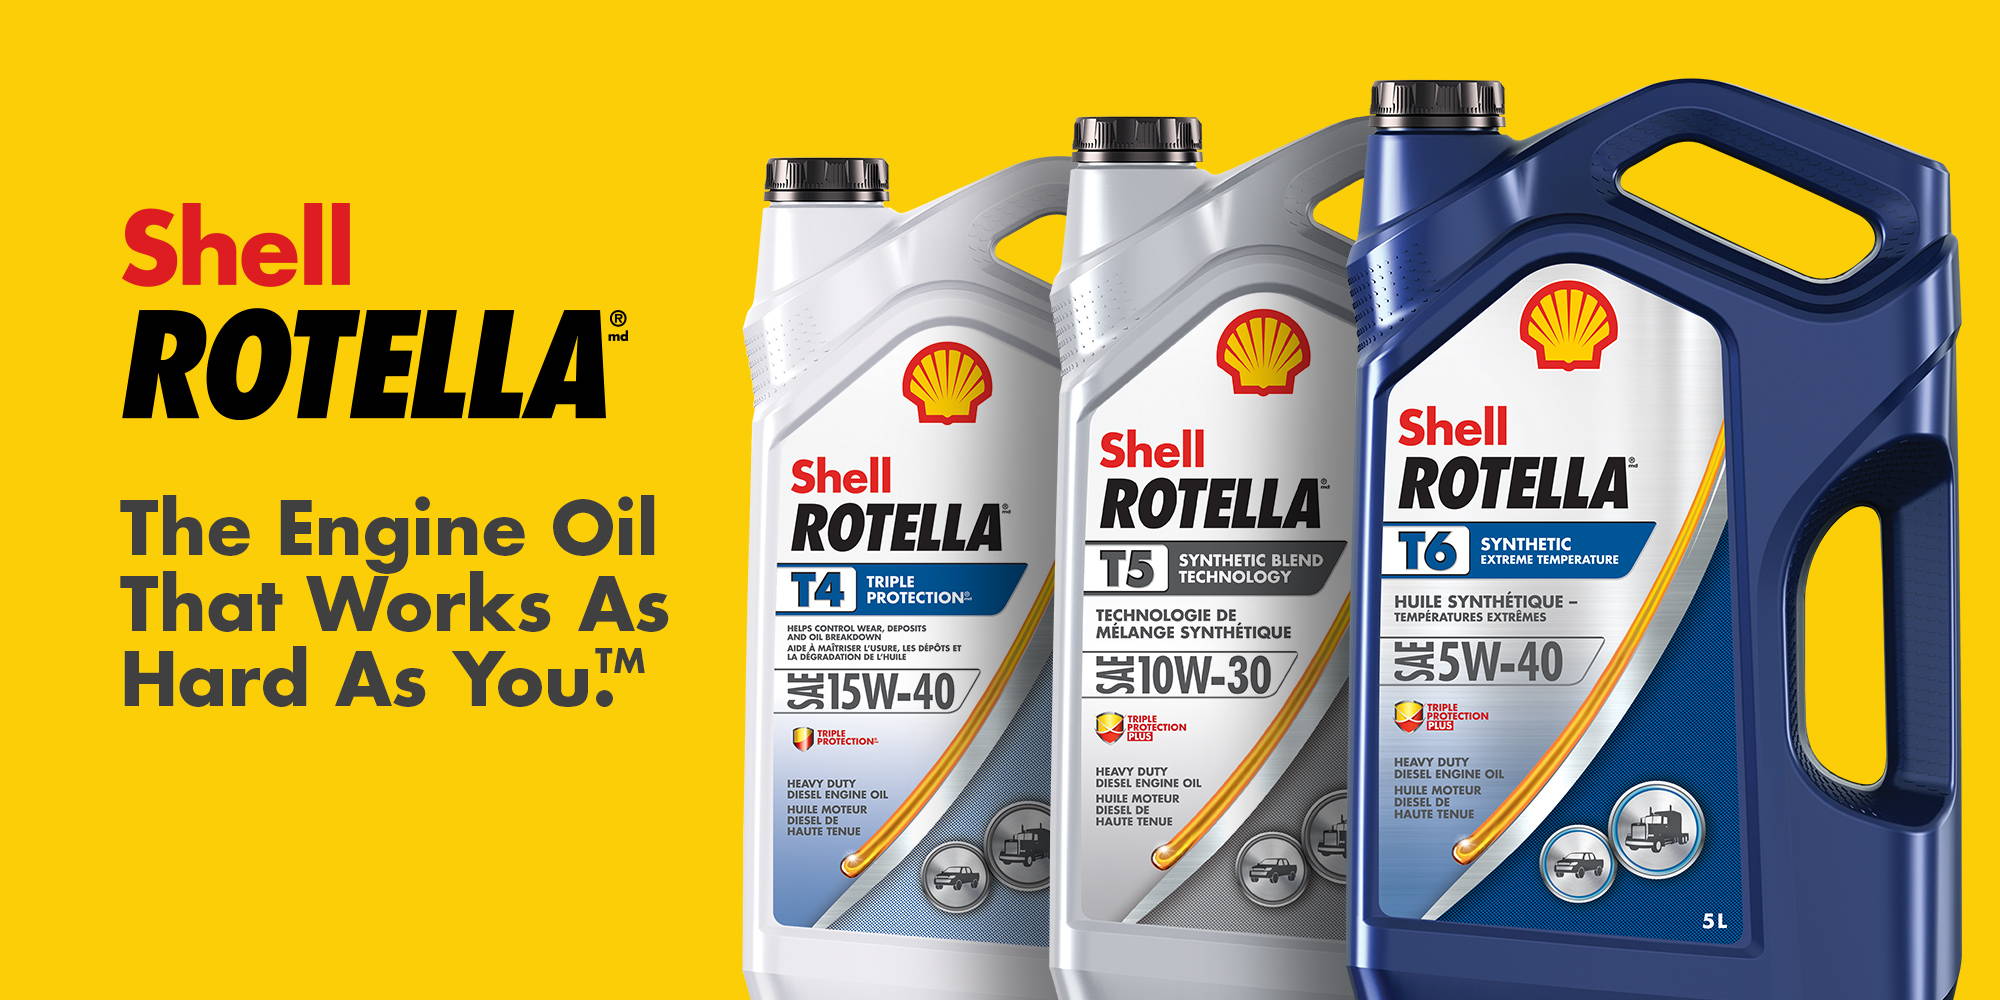 shell rotella the engine oil that works as hard as you